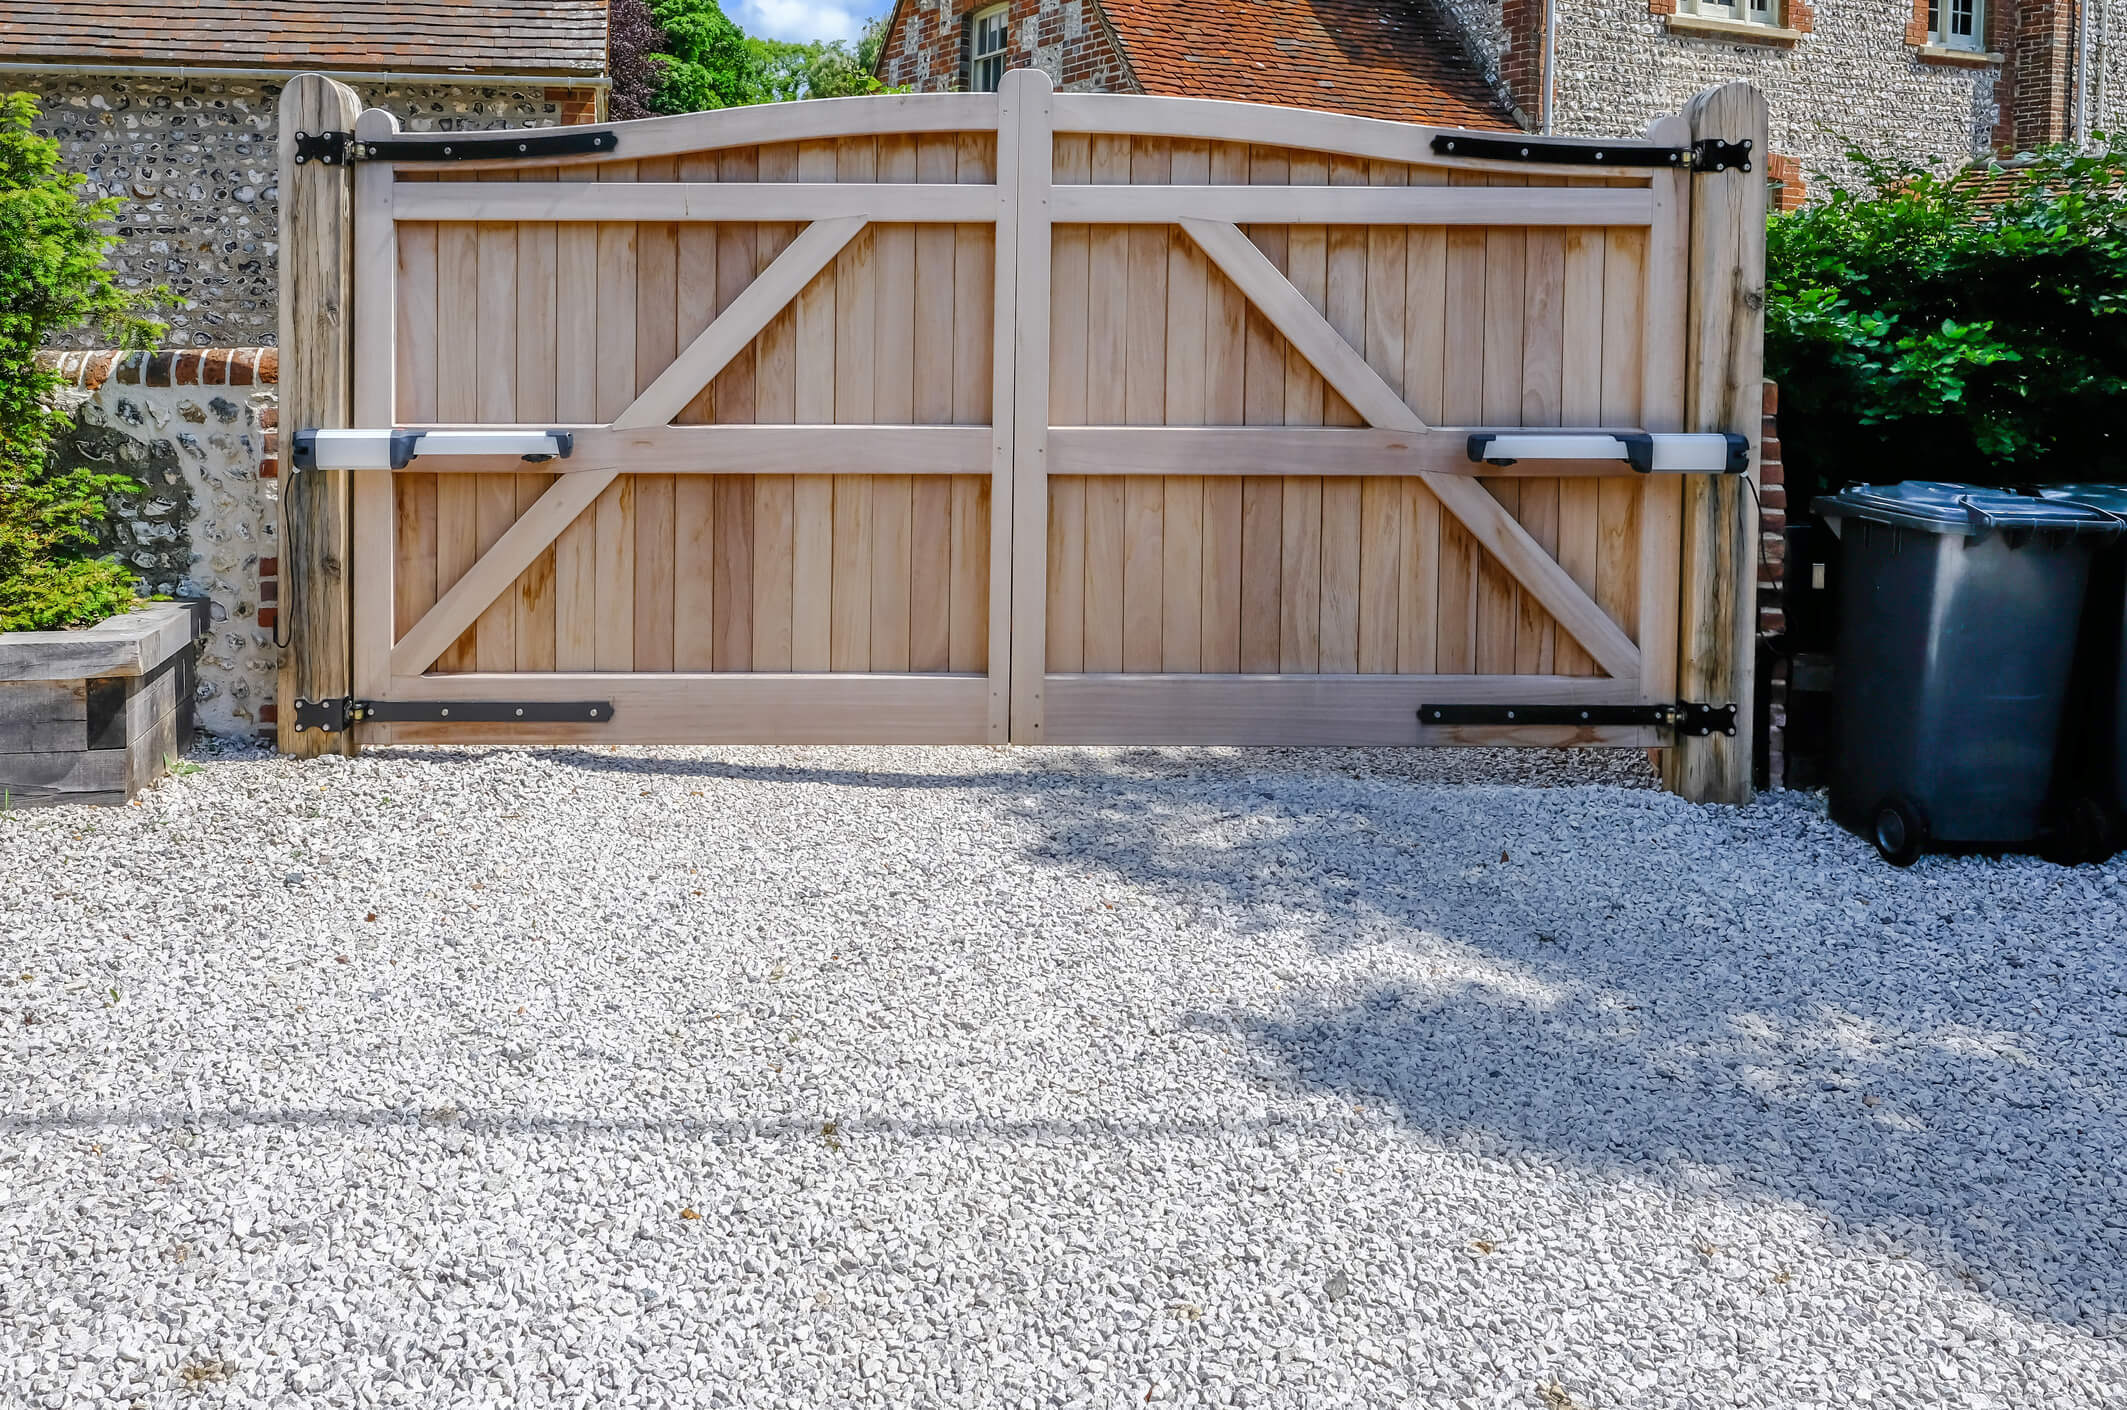 Large wooden entry electric gates with stone driveway